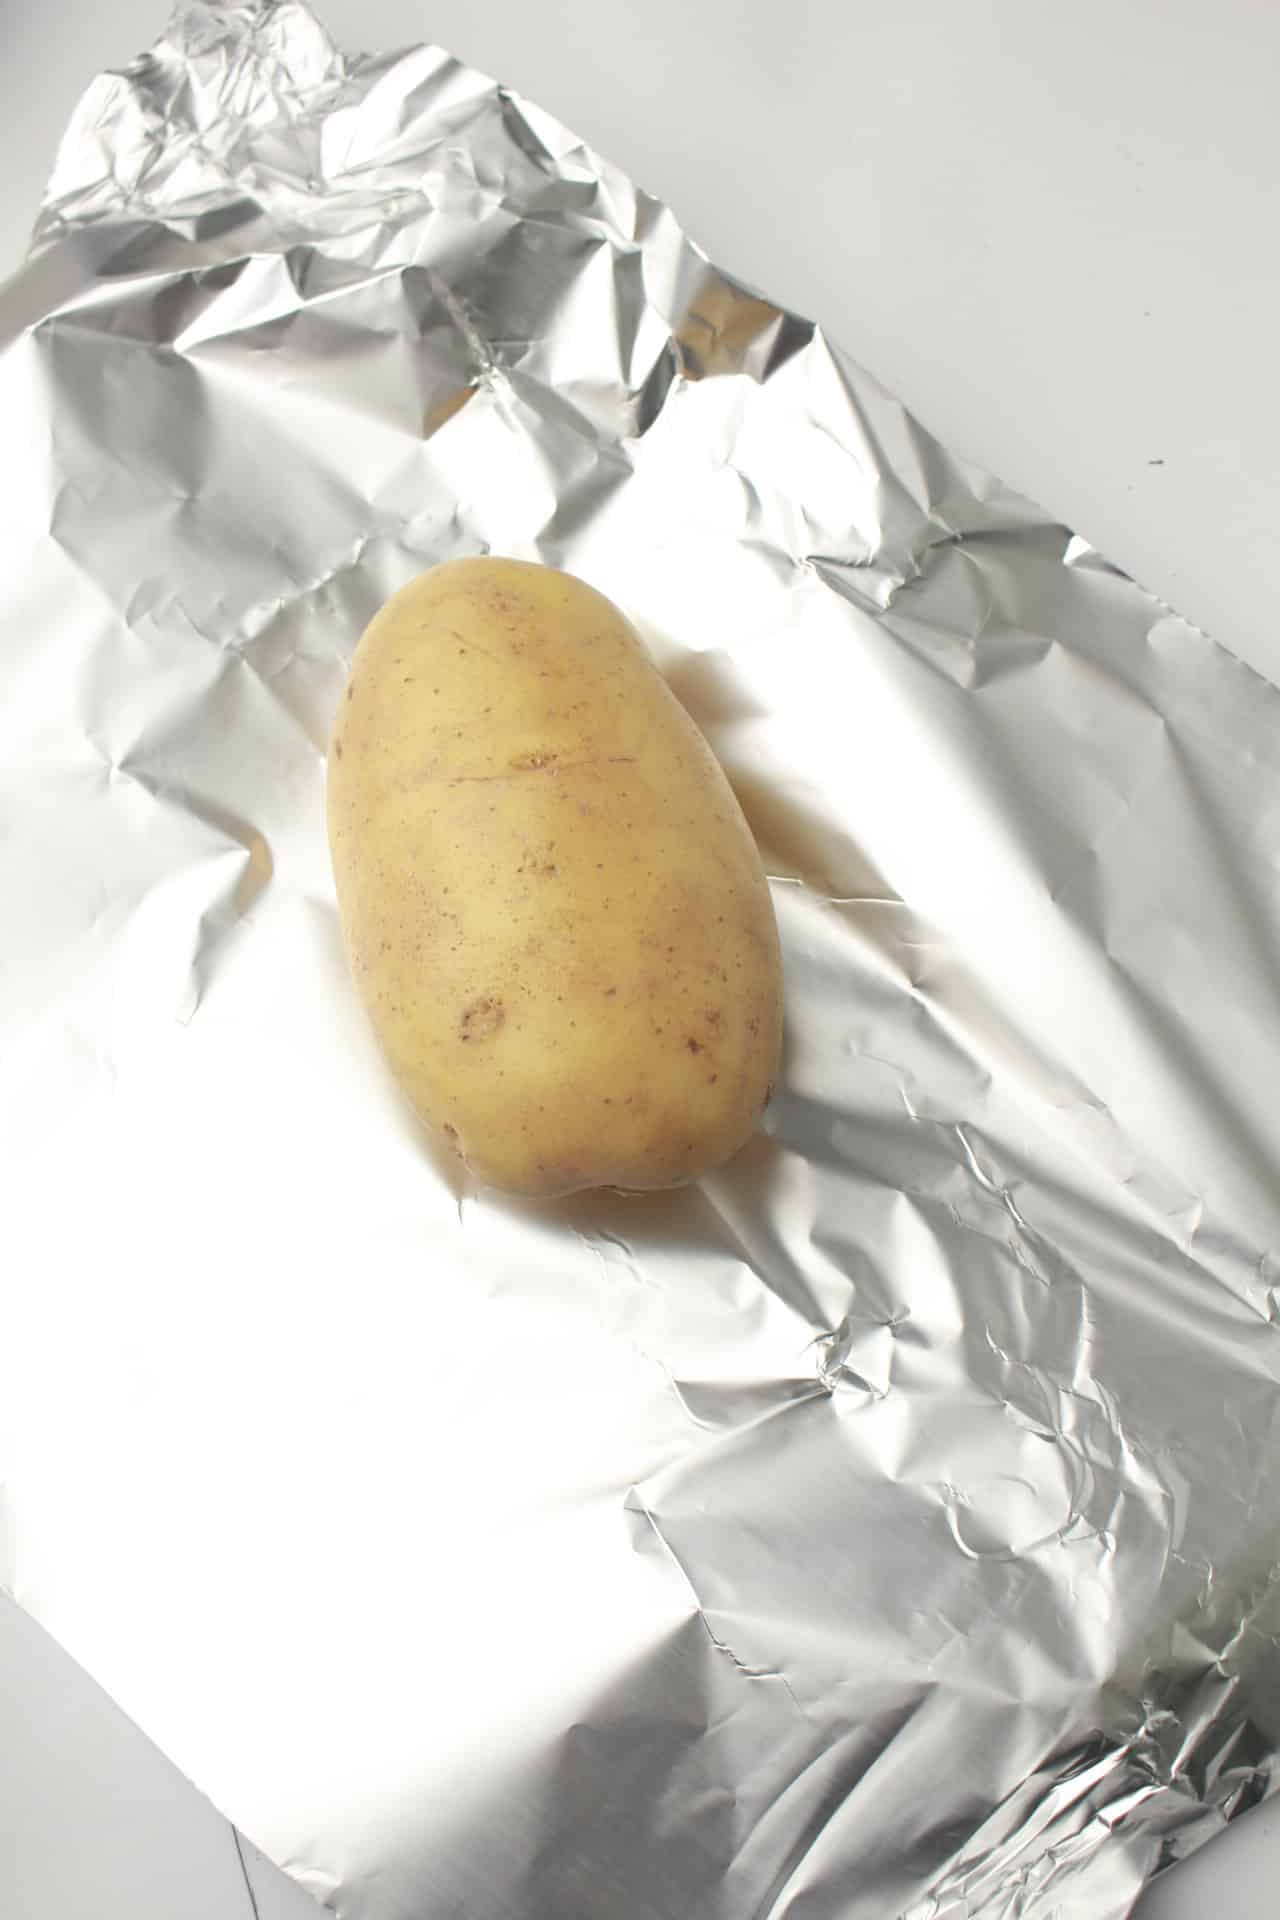 How long to bake potatoes at 375 in foil